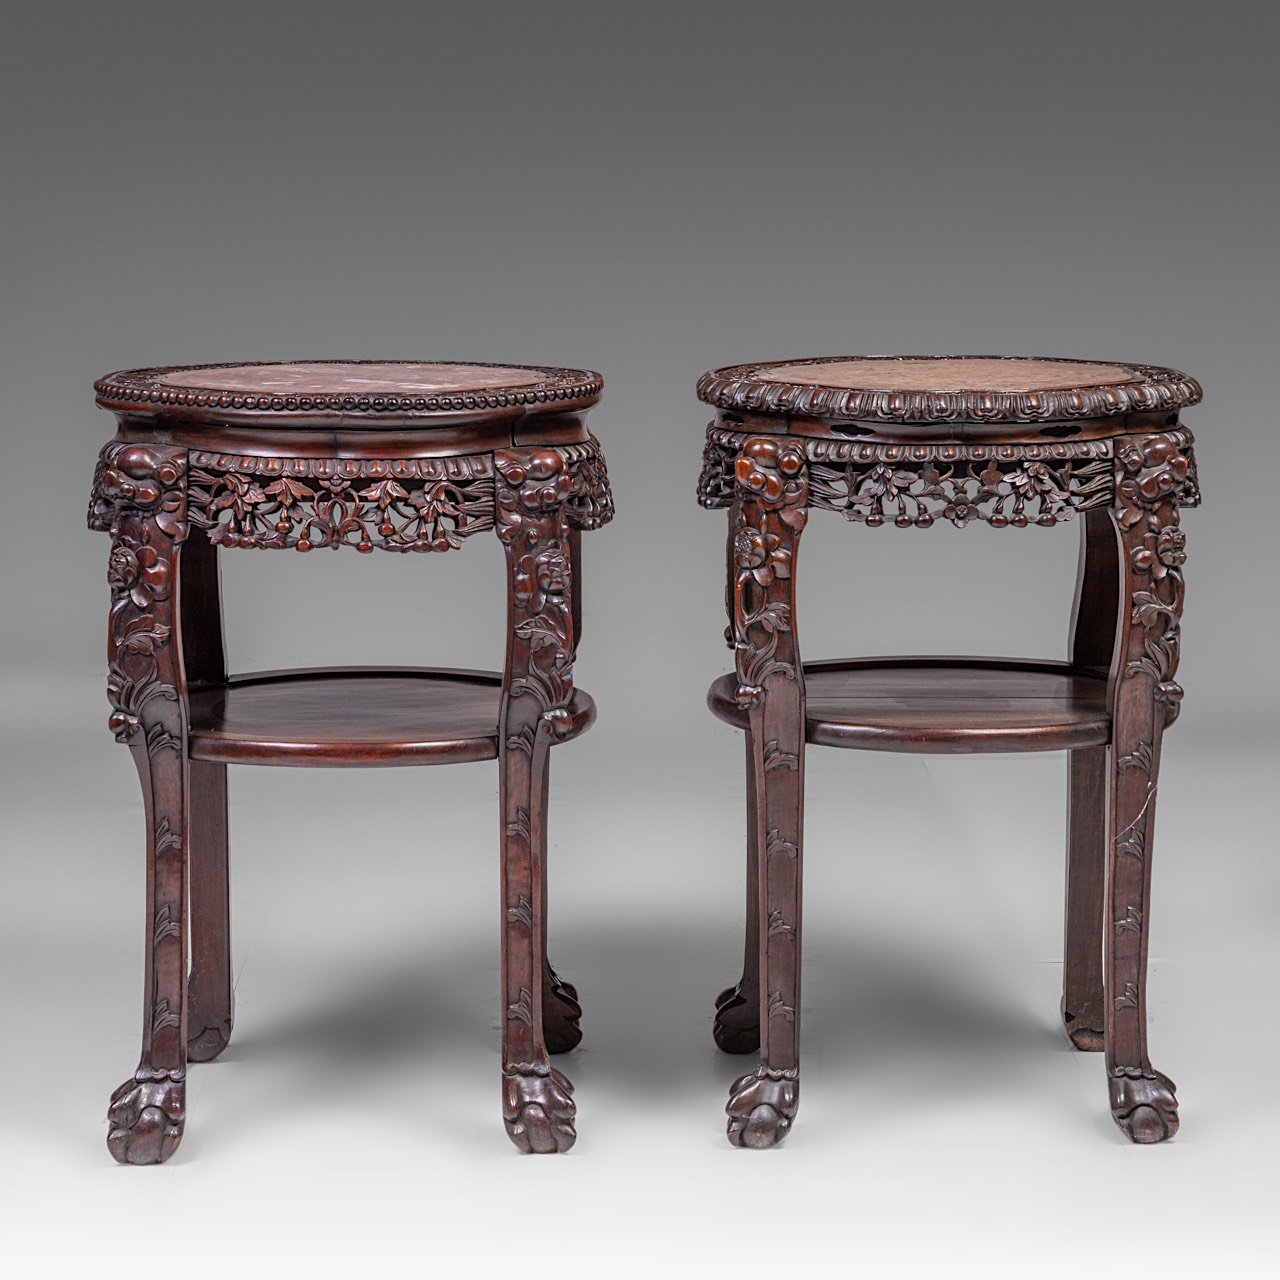 A small collection of four South Chinese carved hardwood bases, all with a marble top, late Qing, ta - Image 7 of 17